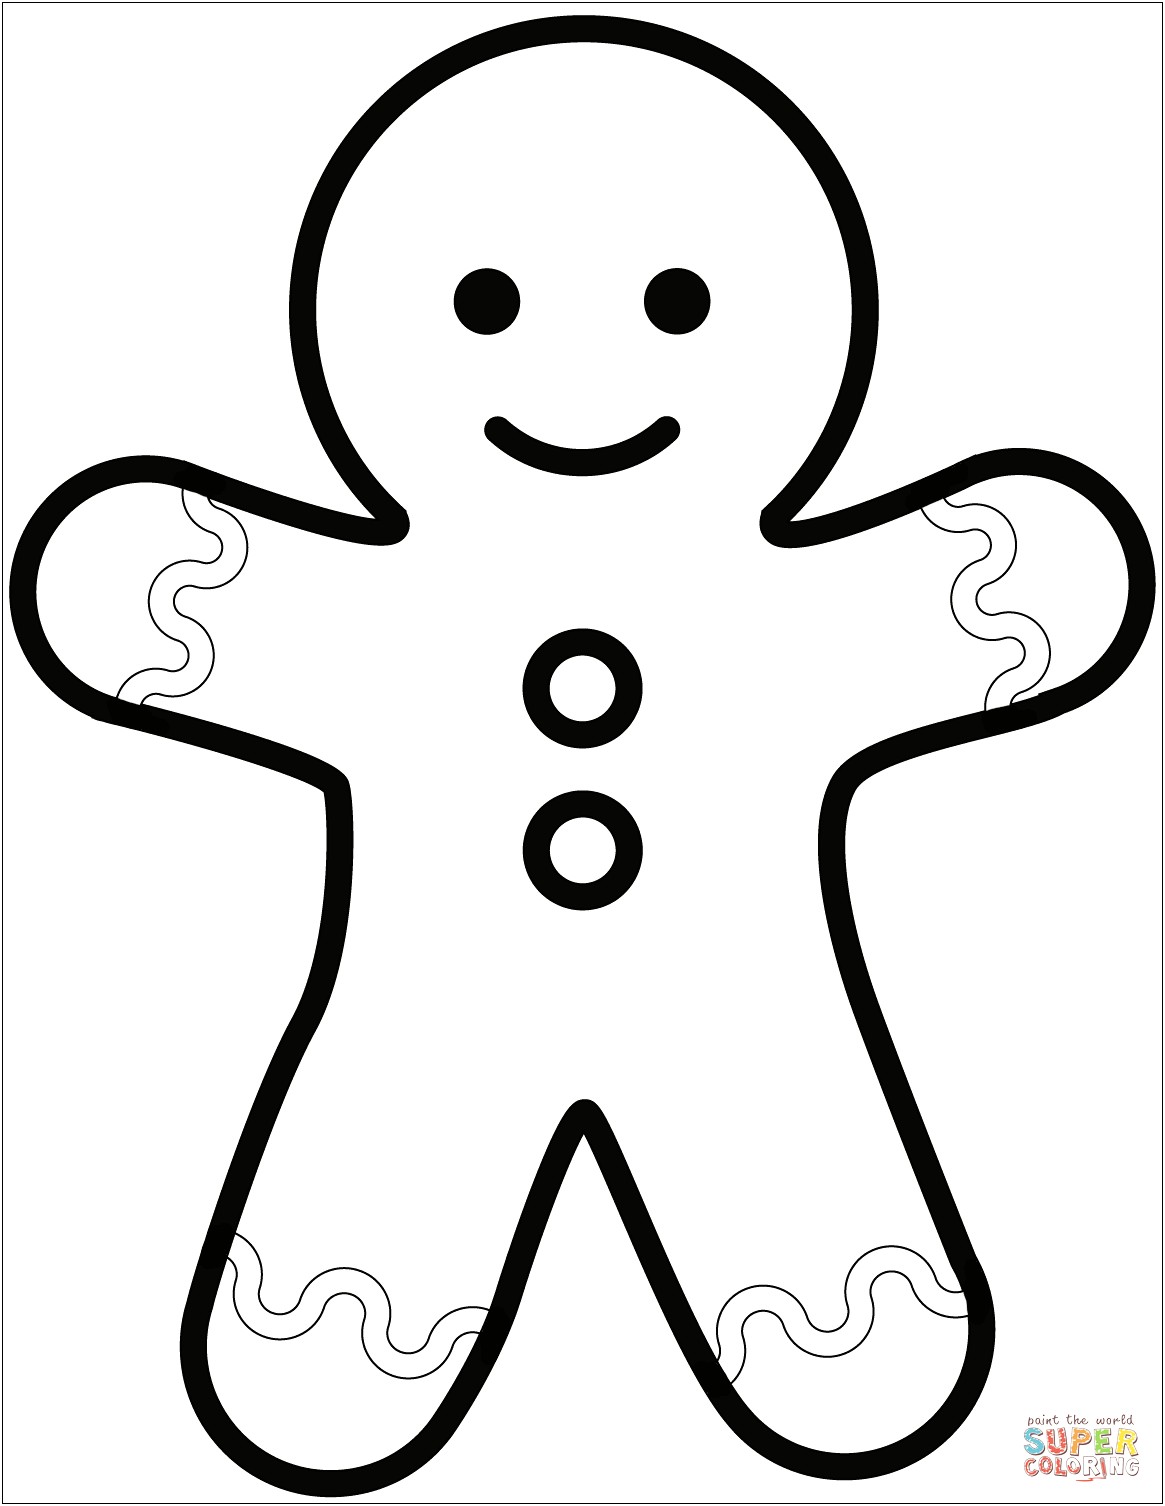 Free Template For Coloring Page Of Gingerbread Man